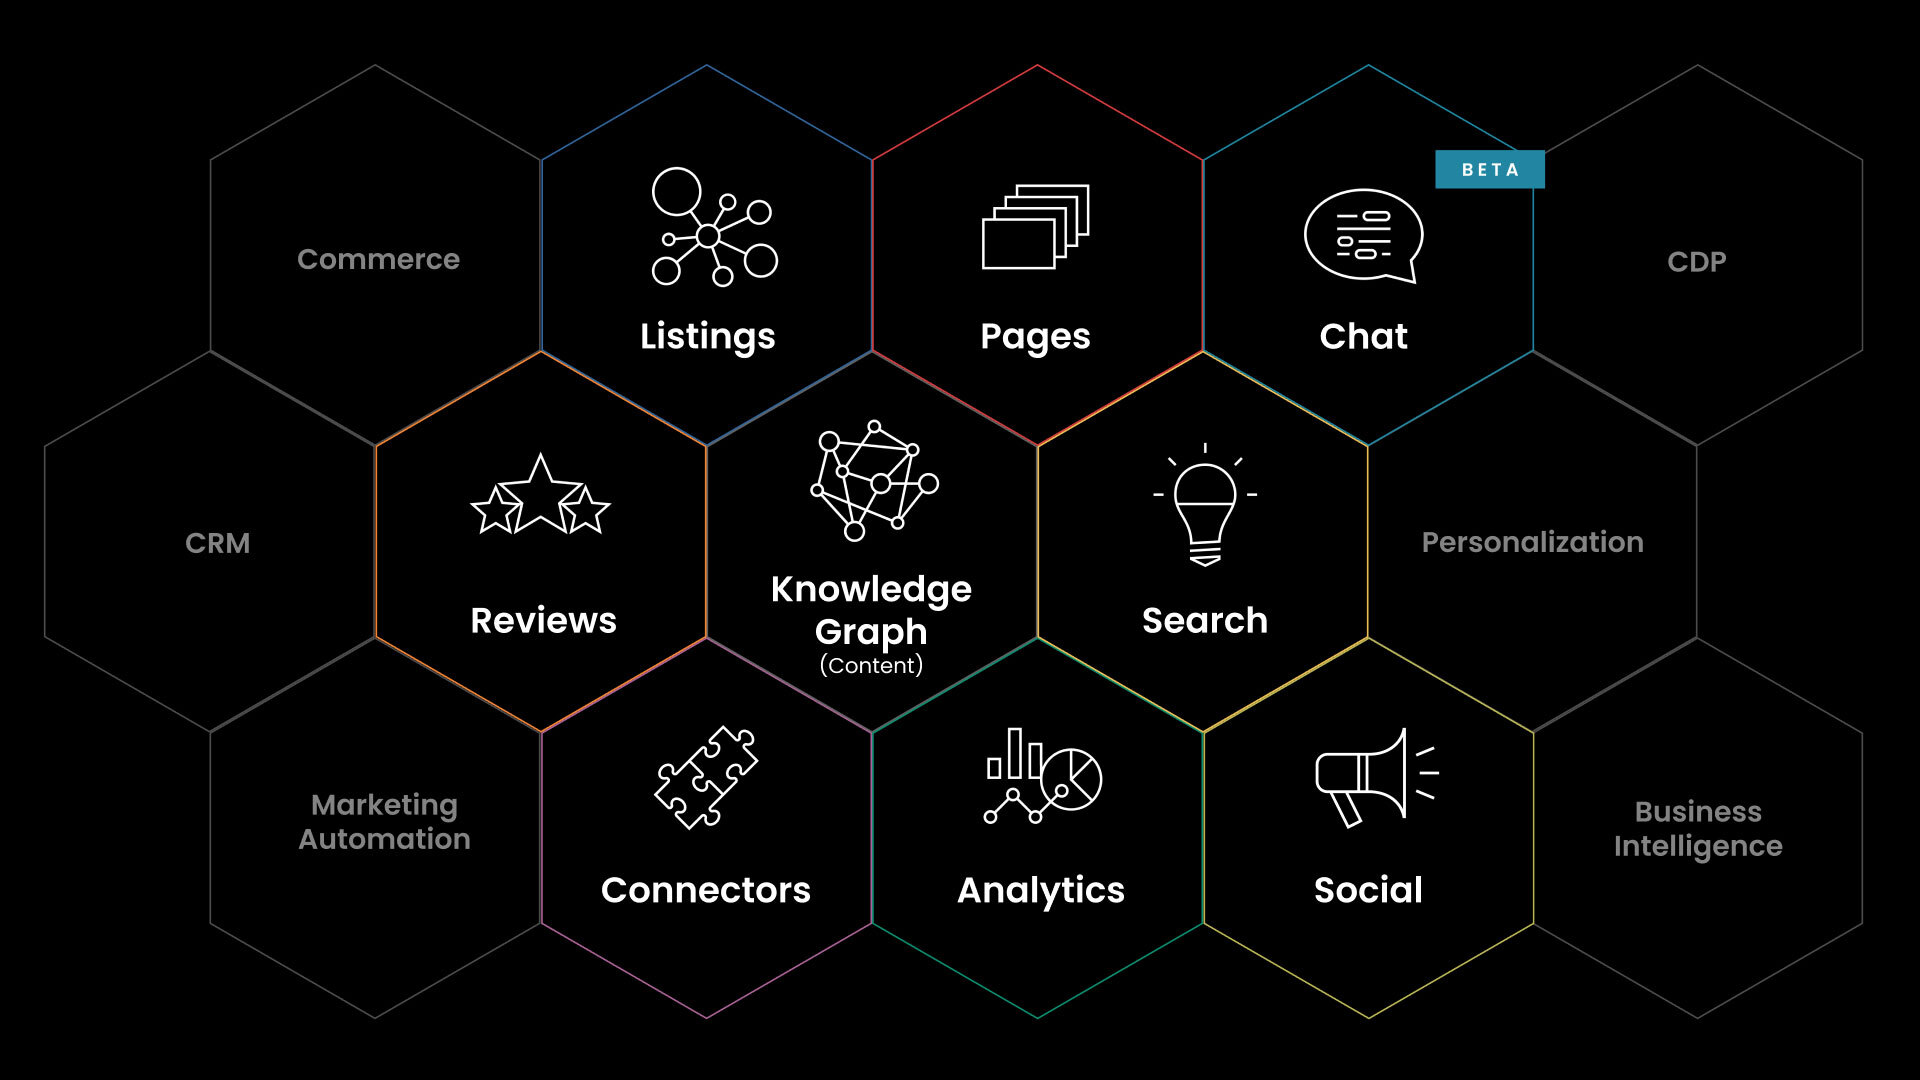 Graphic with the name of Yext Products: Knowledge Graph, Pages, Chat, Analytics, Reviews, and listings.